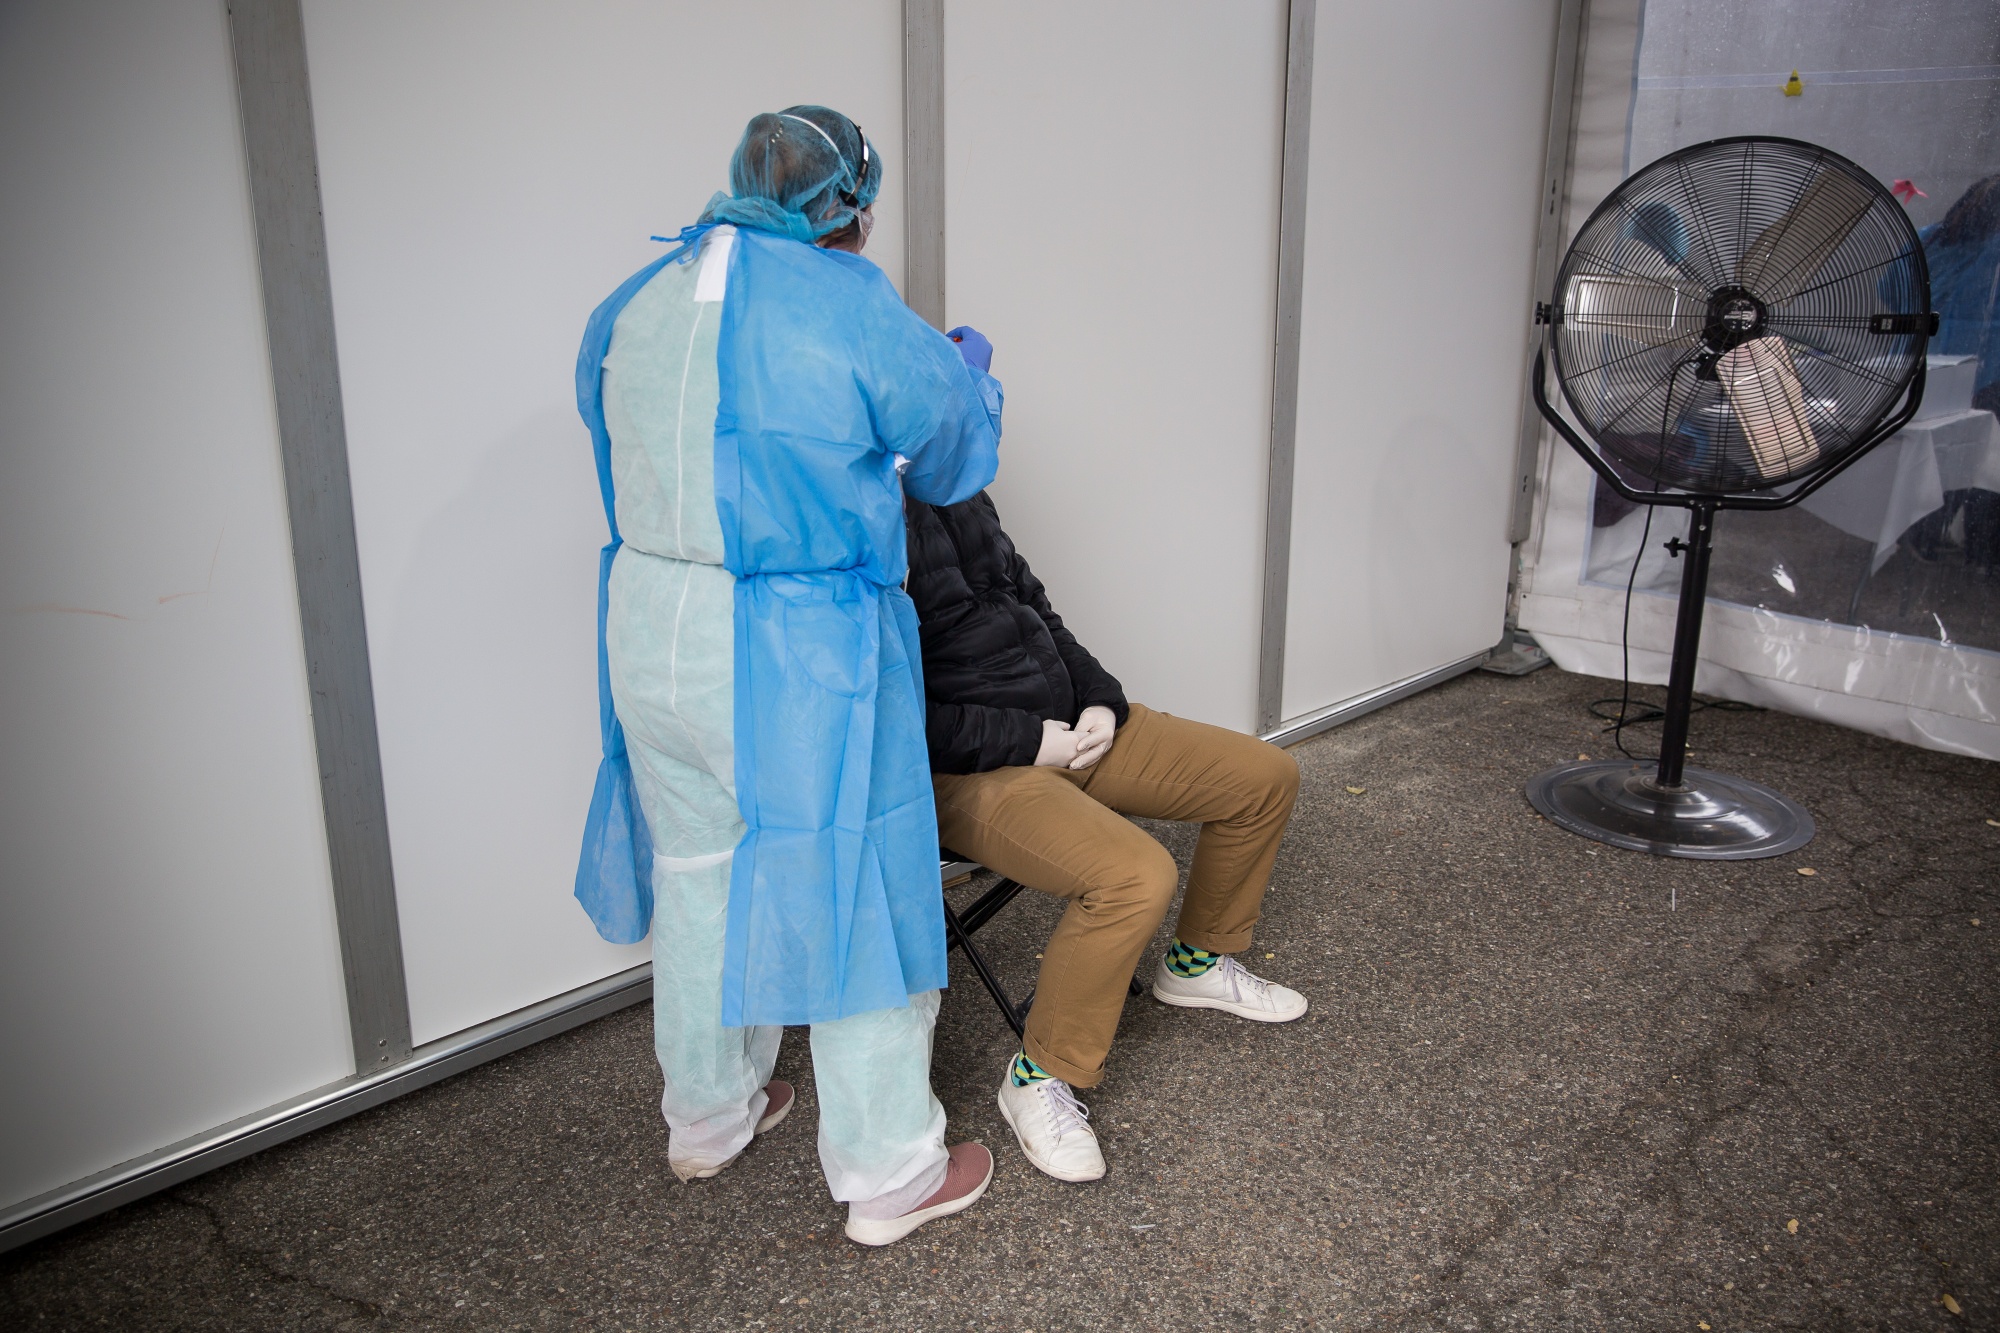 A nurse practitioner swabs a patient at a Covid-19 testing center in Brooklyn, New York on April 20.